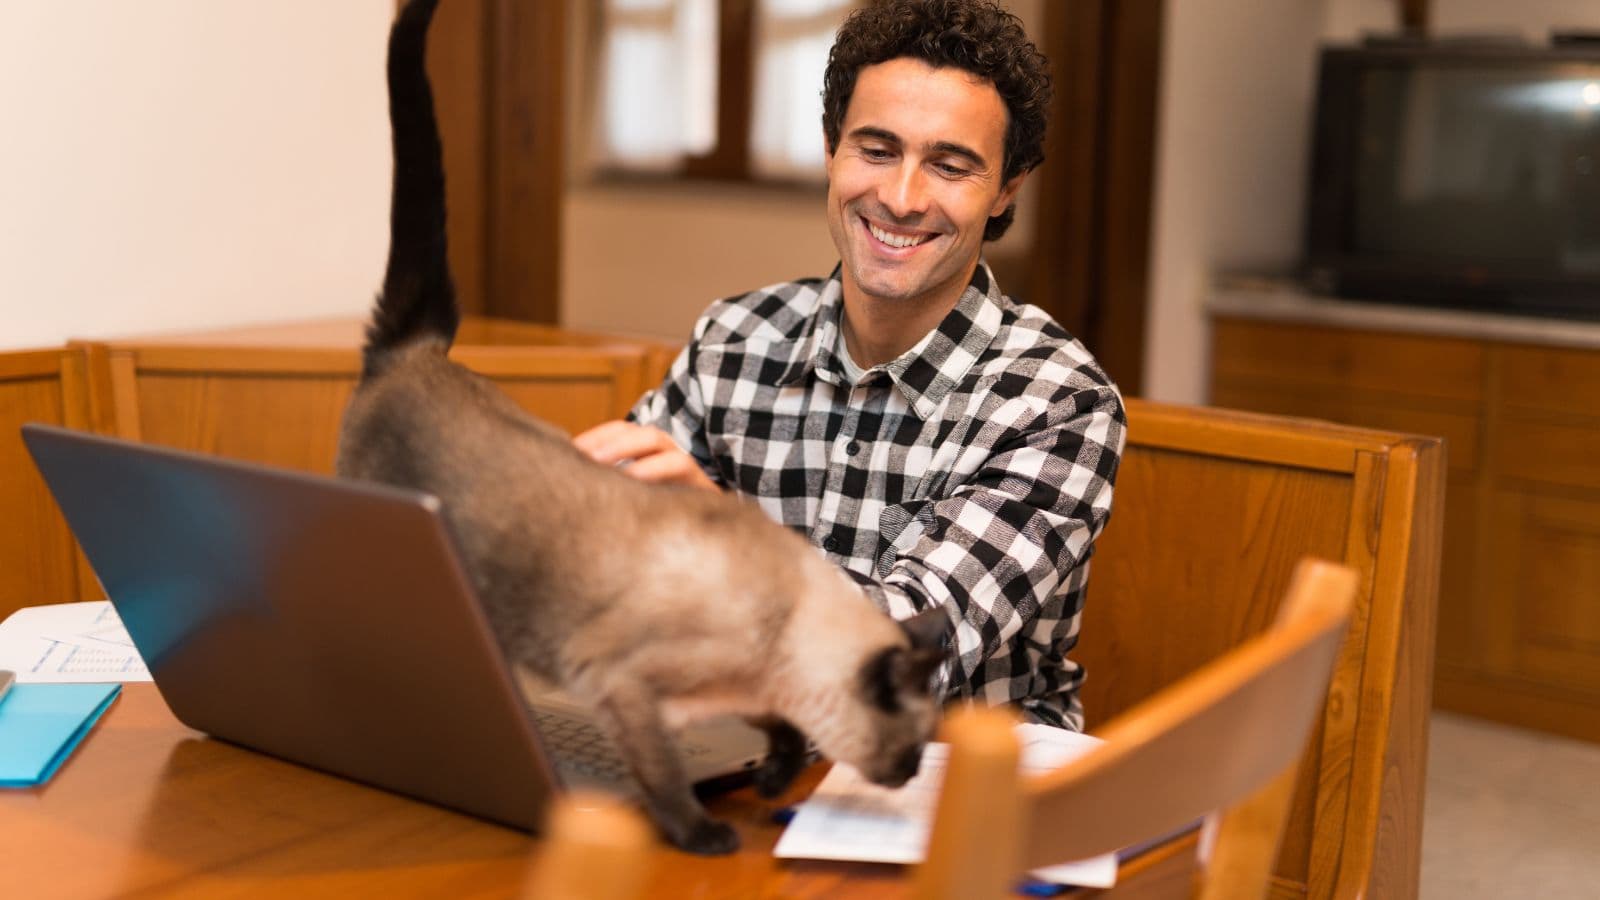 A man in a checked shirt sits at a kitchen table working on a laptop while petting a cat that is walking in front of him.